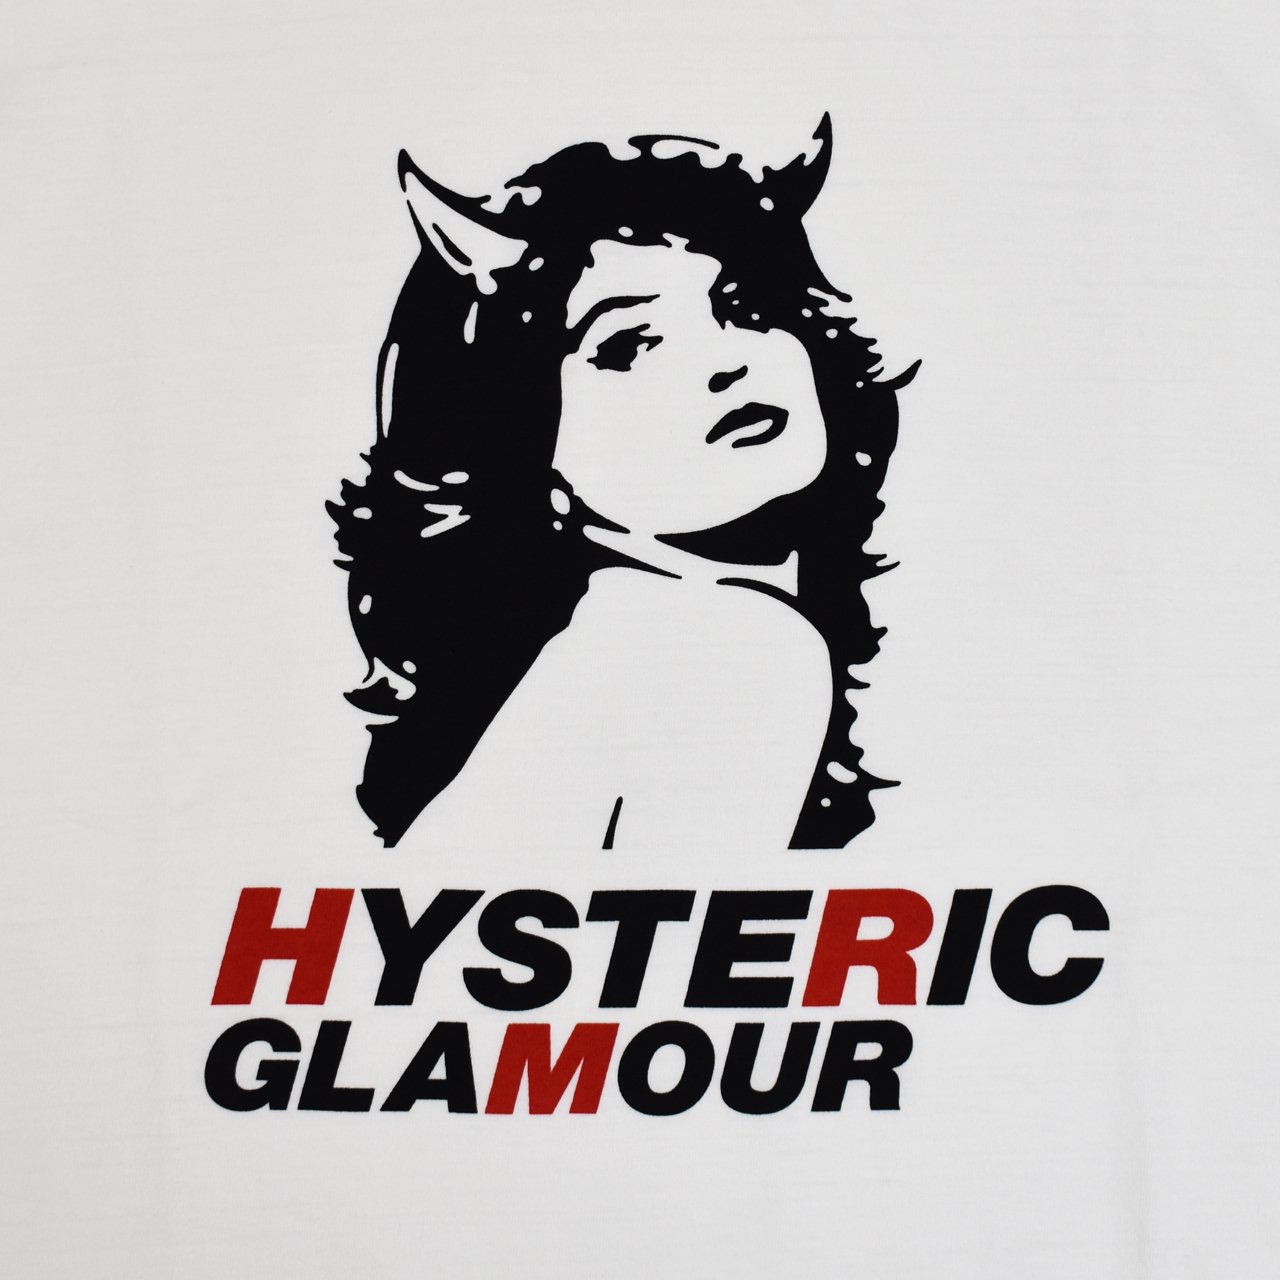 <img class='new_mark_img1' src='https://img.shop-pro.jp/img/new/icons5.gif' style='border:none;display:inline;margin:0px;padding:0px;width:auto;' />HYSTERIC GLAMOUR (ヒステリックグラマー)｜2TONE DEVIL WOMAN Tシャツ ホワイト